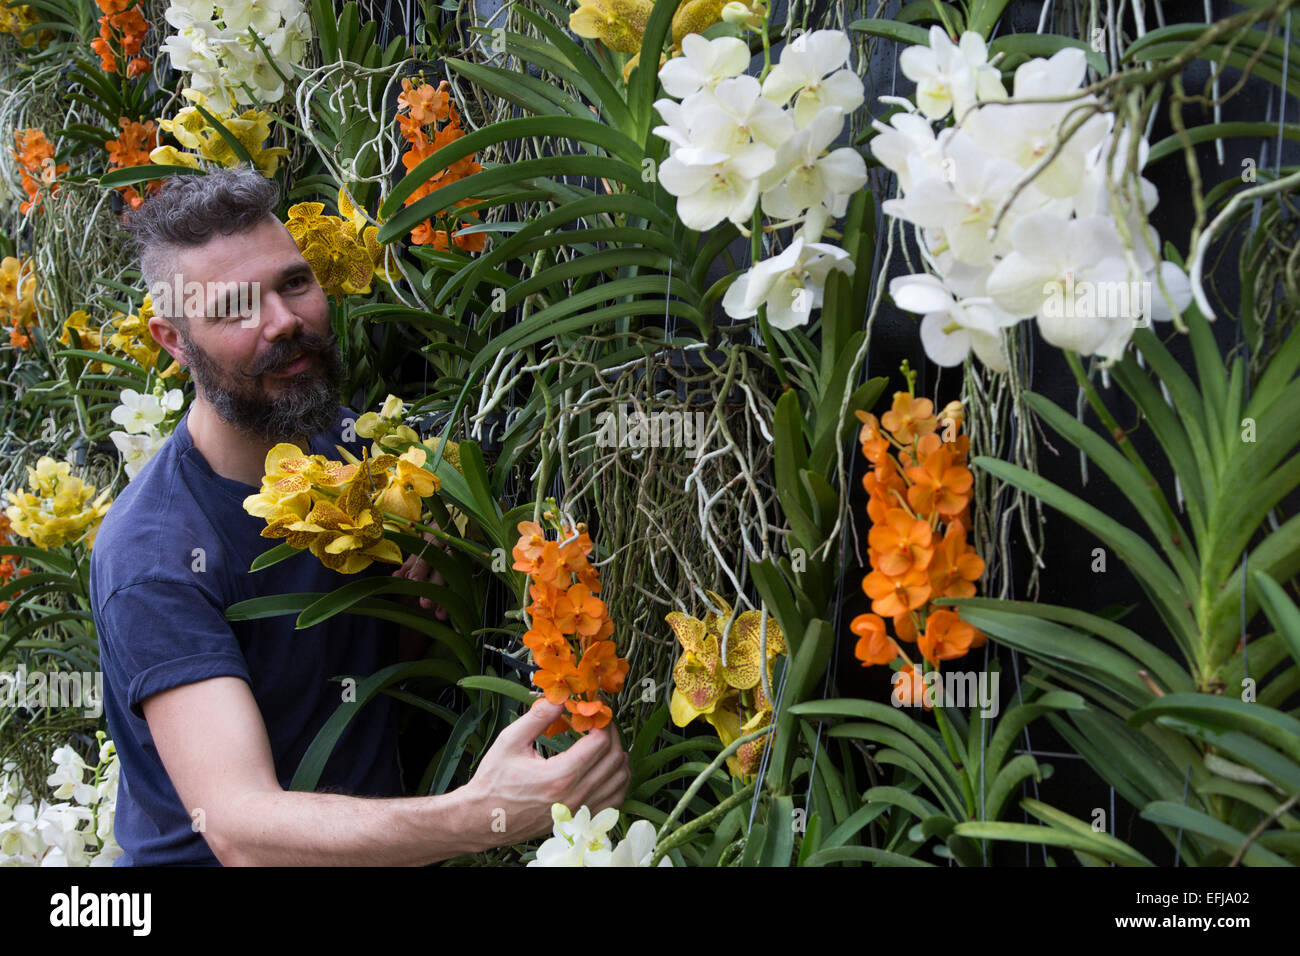 London, UK. 5 February 2015. Kew Gardens horticulturist Henck Roling prepares a floral display featuring Vanda orchids. 'Alluring Orchids' is the first festival on the Royal Botanic Gardens' 2015 calendar which showcases thousands of exotic and rare flowers in the Princess of Wales Conservatory from 7 February to 8 March 2015. Stock Photo